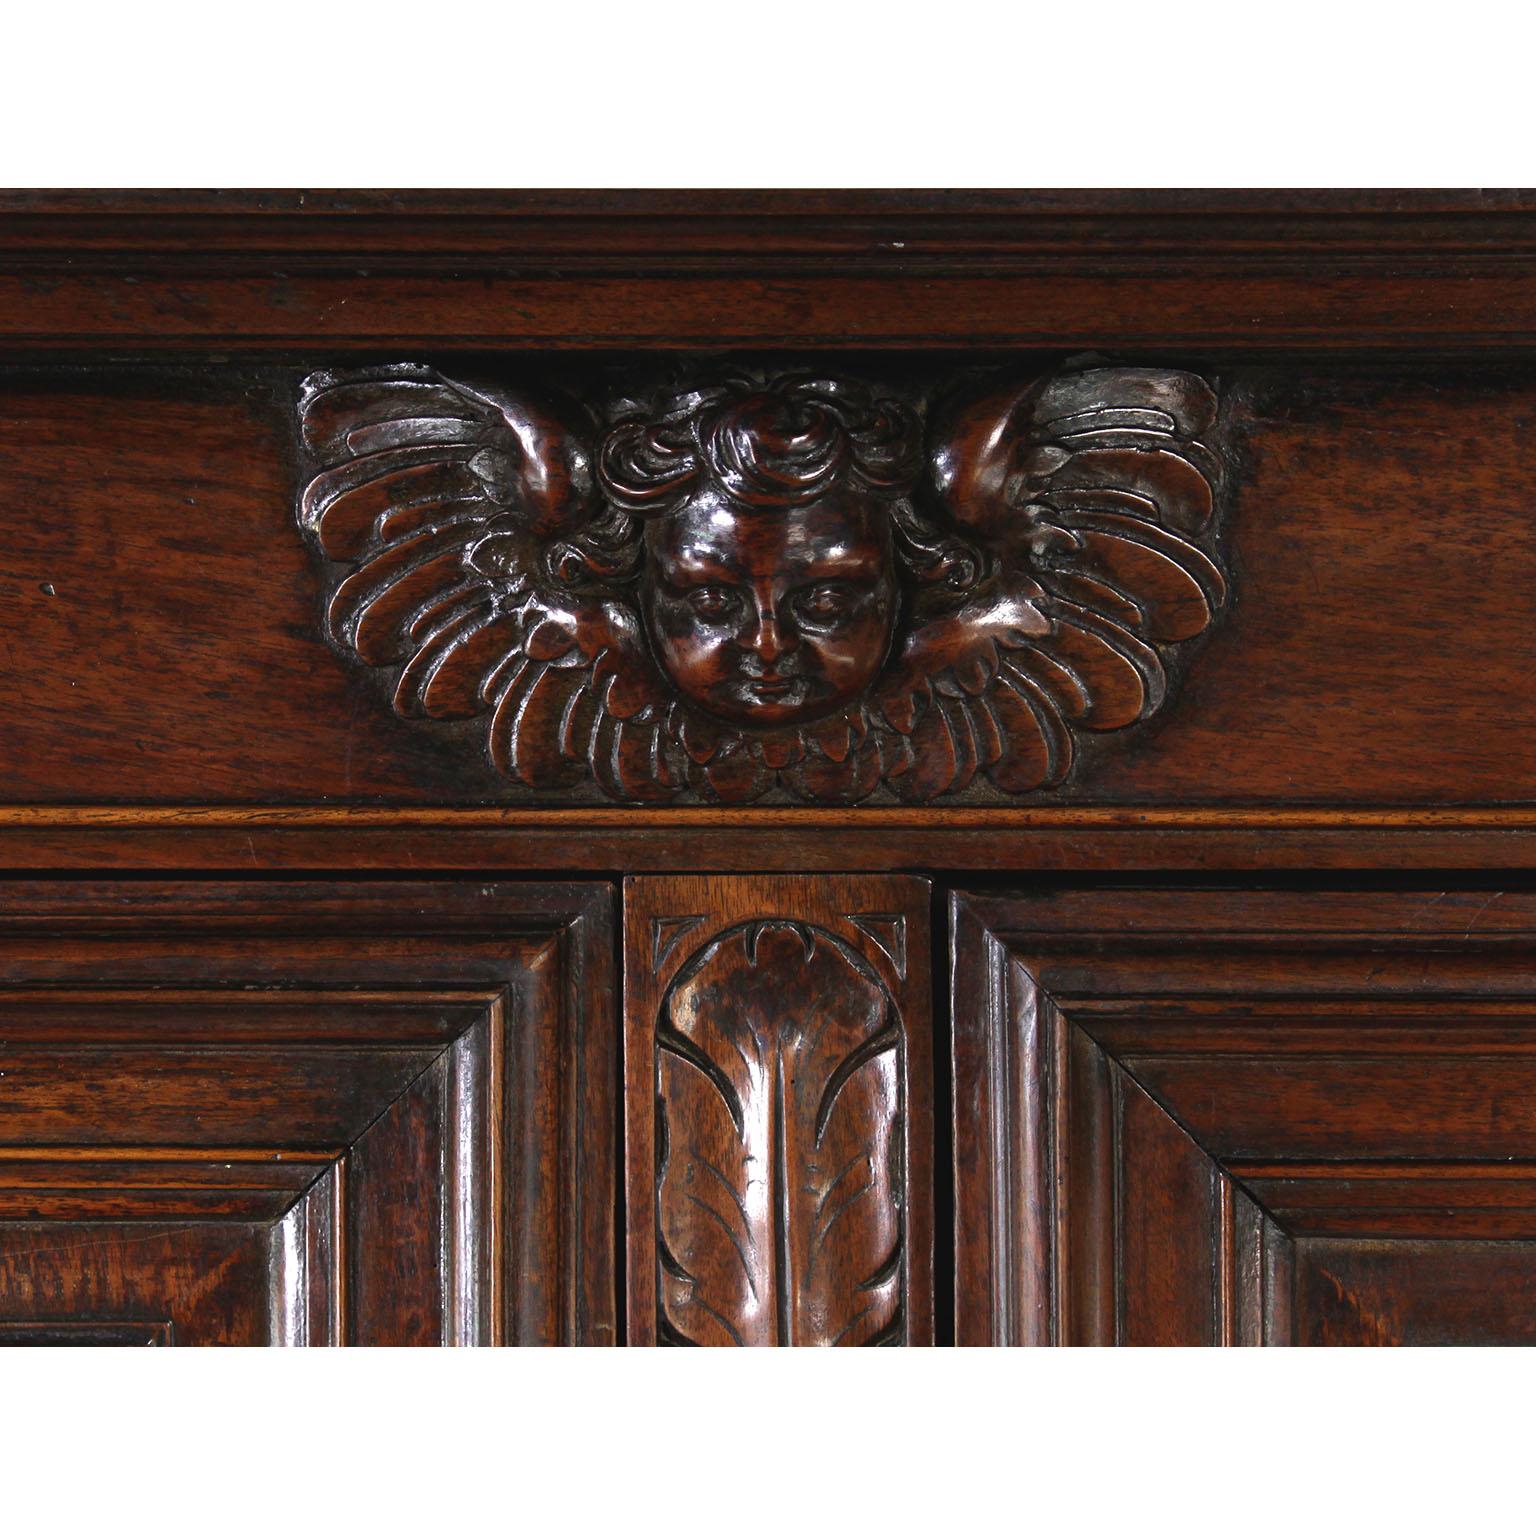 17th Century A 17th-18th Century French/Italian Renaissance Walnut Carved Credenza Cabinet For Sale